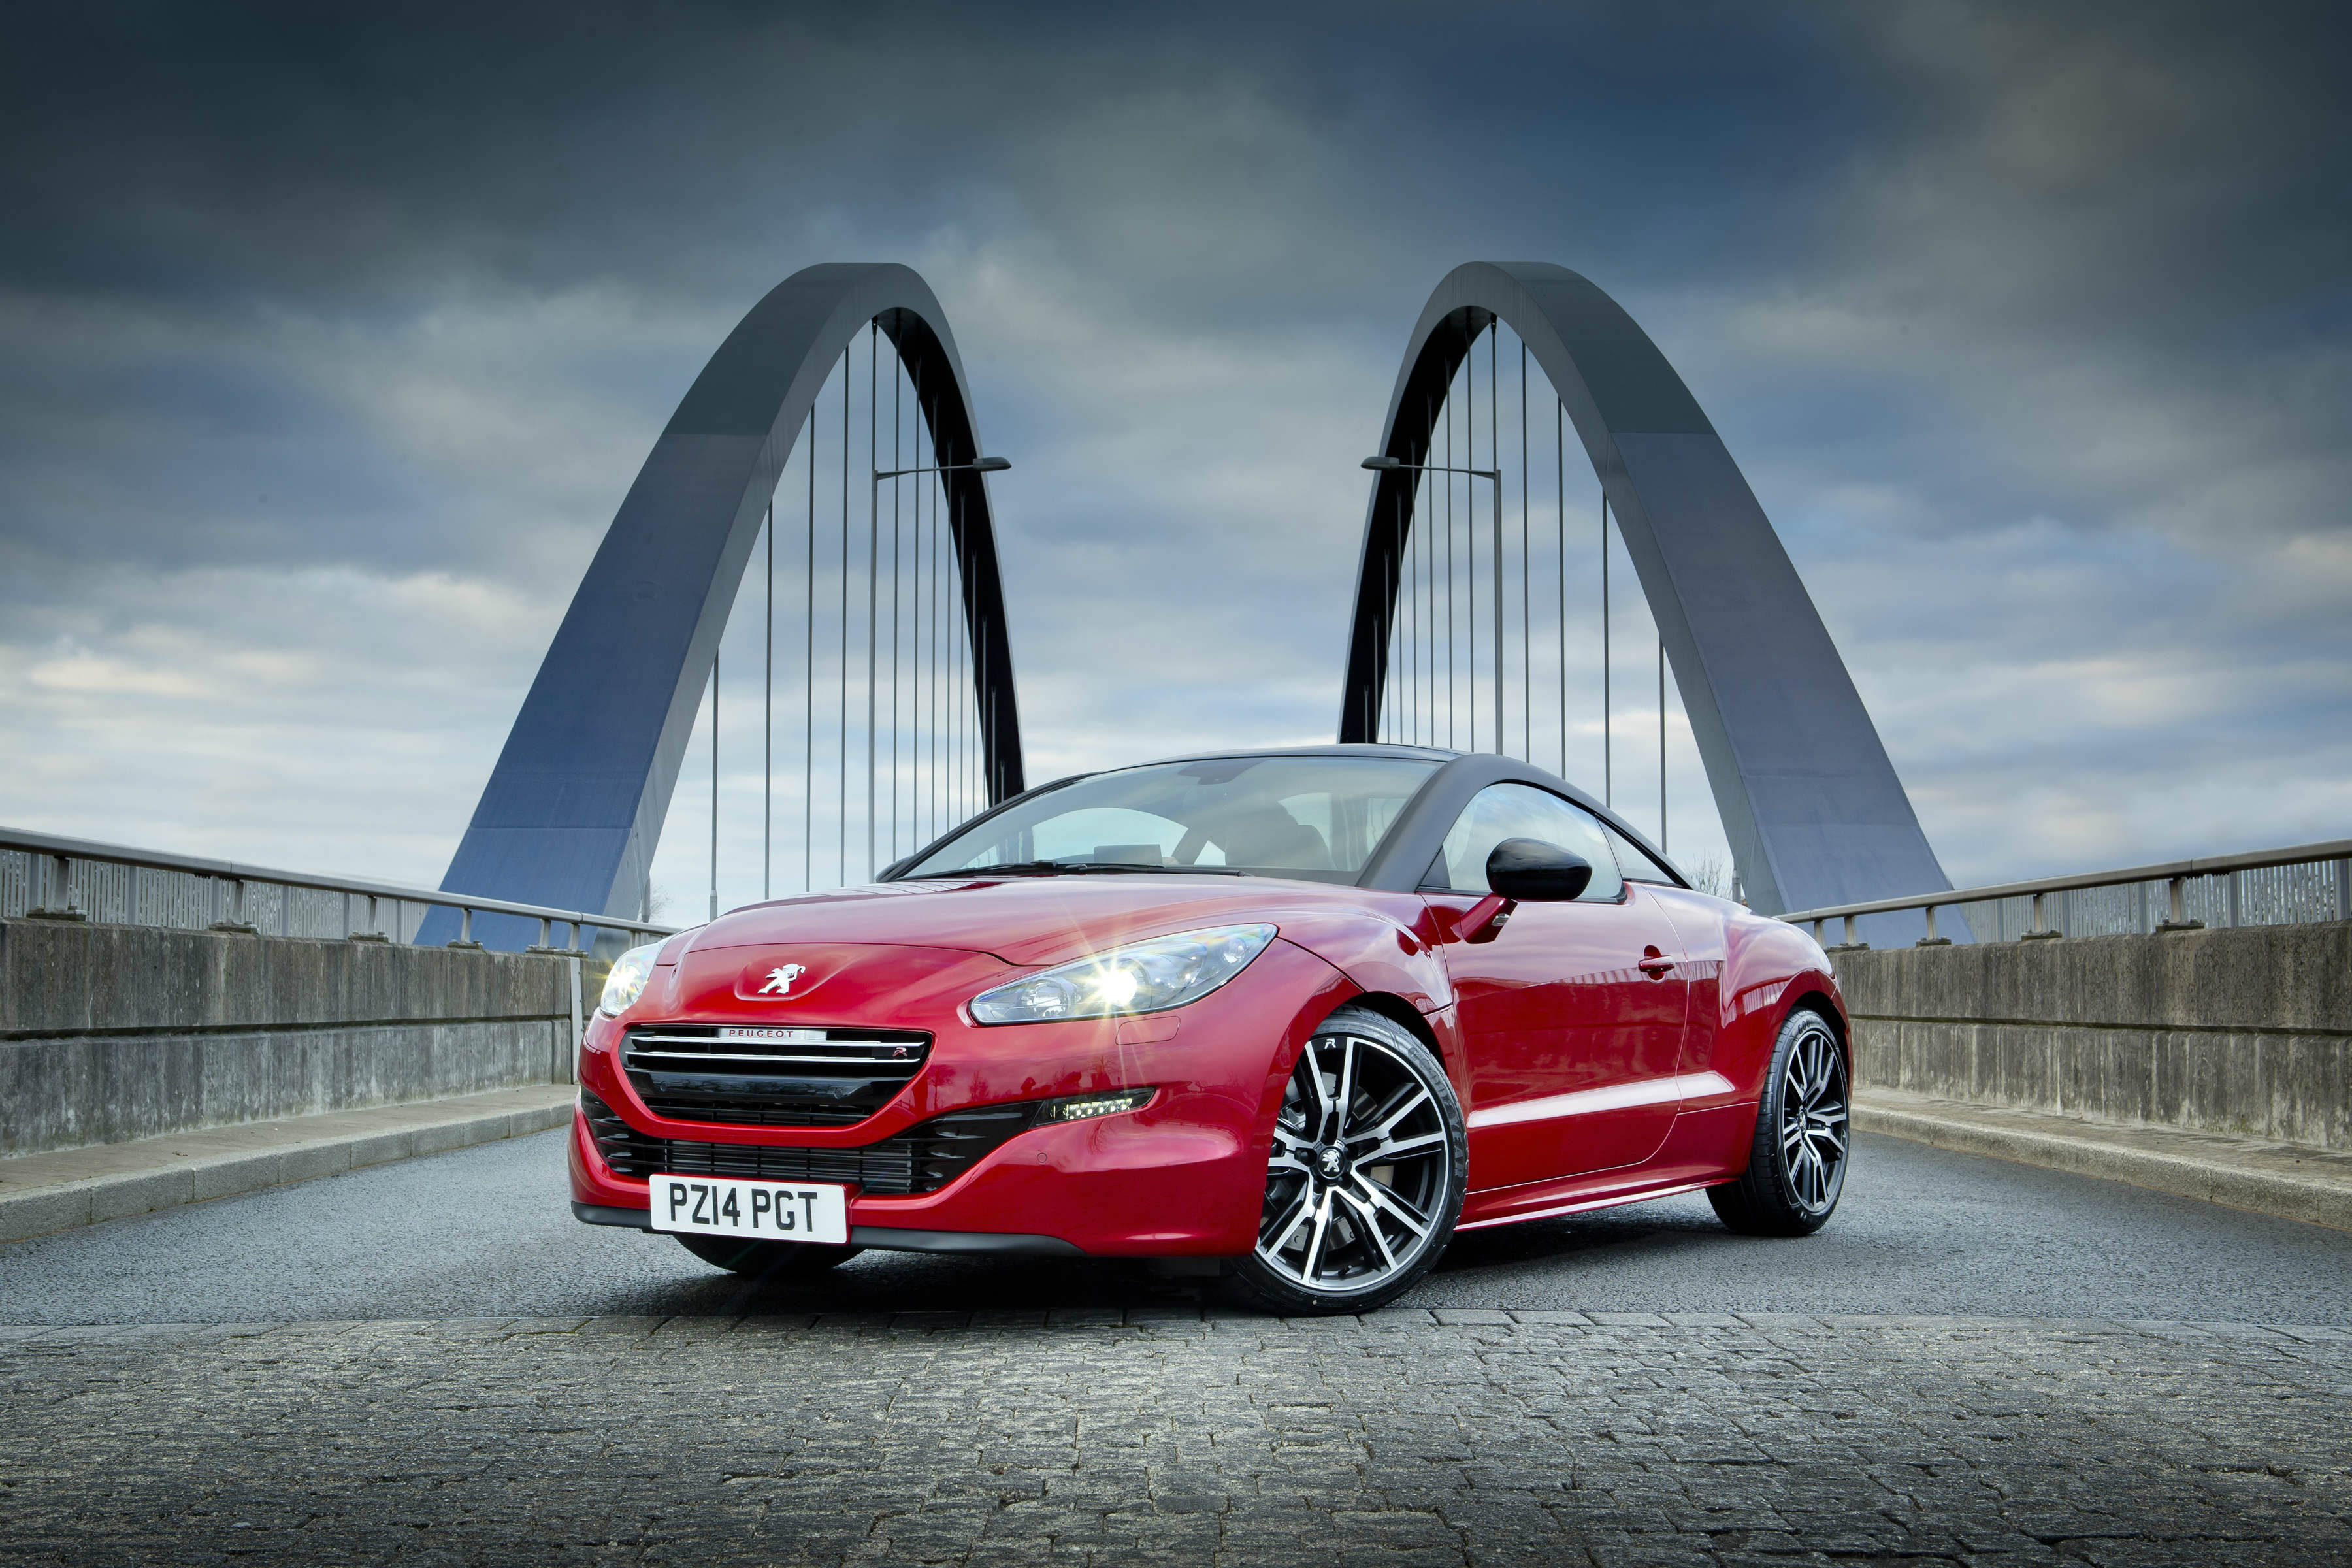 Buying guide to French sports cars includes the Peugeot RCZ-R